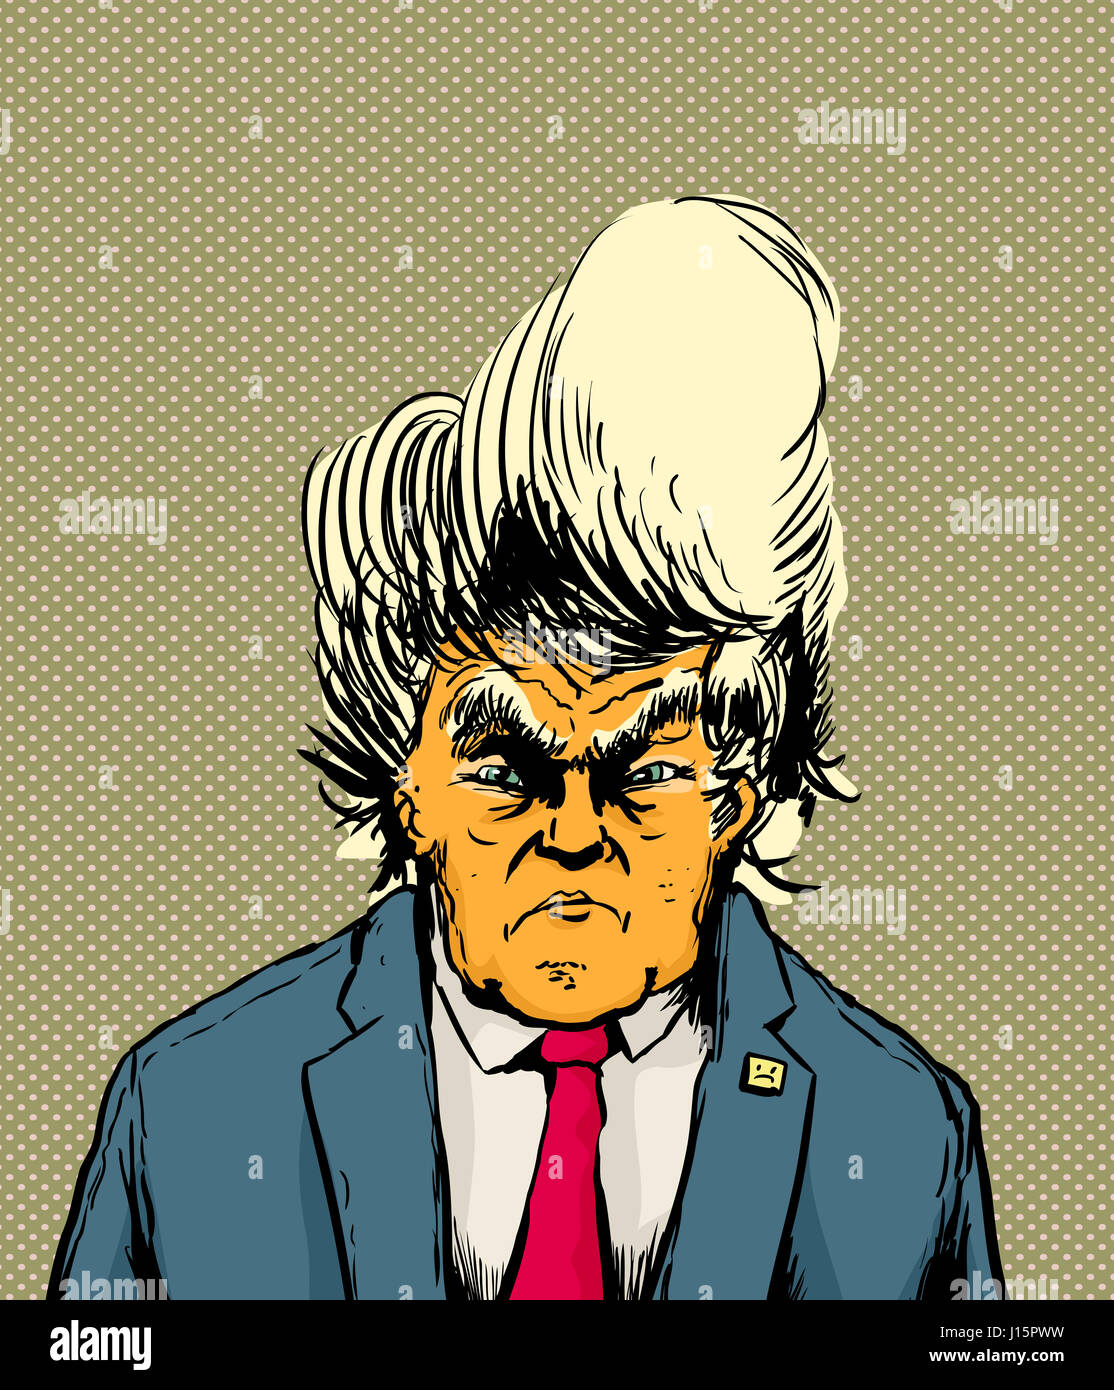 April 18, 2017. Caricature of a frowning orange skinned Donald Trump with strange hairdo Stock Photo